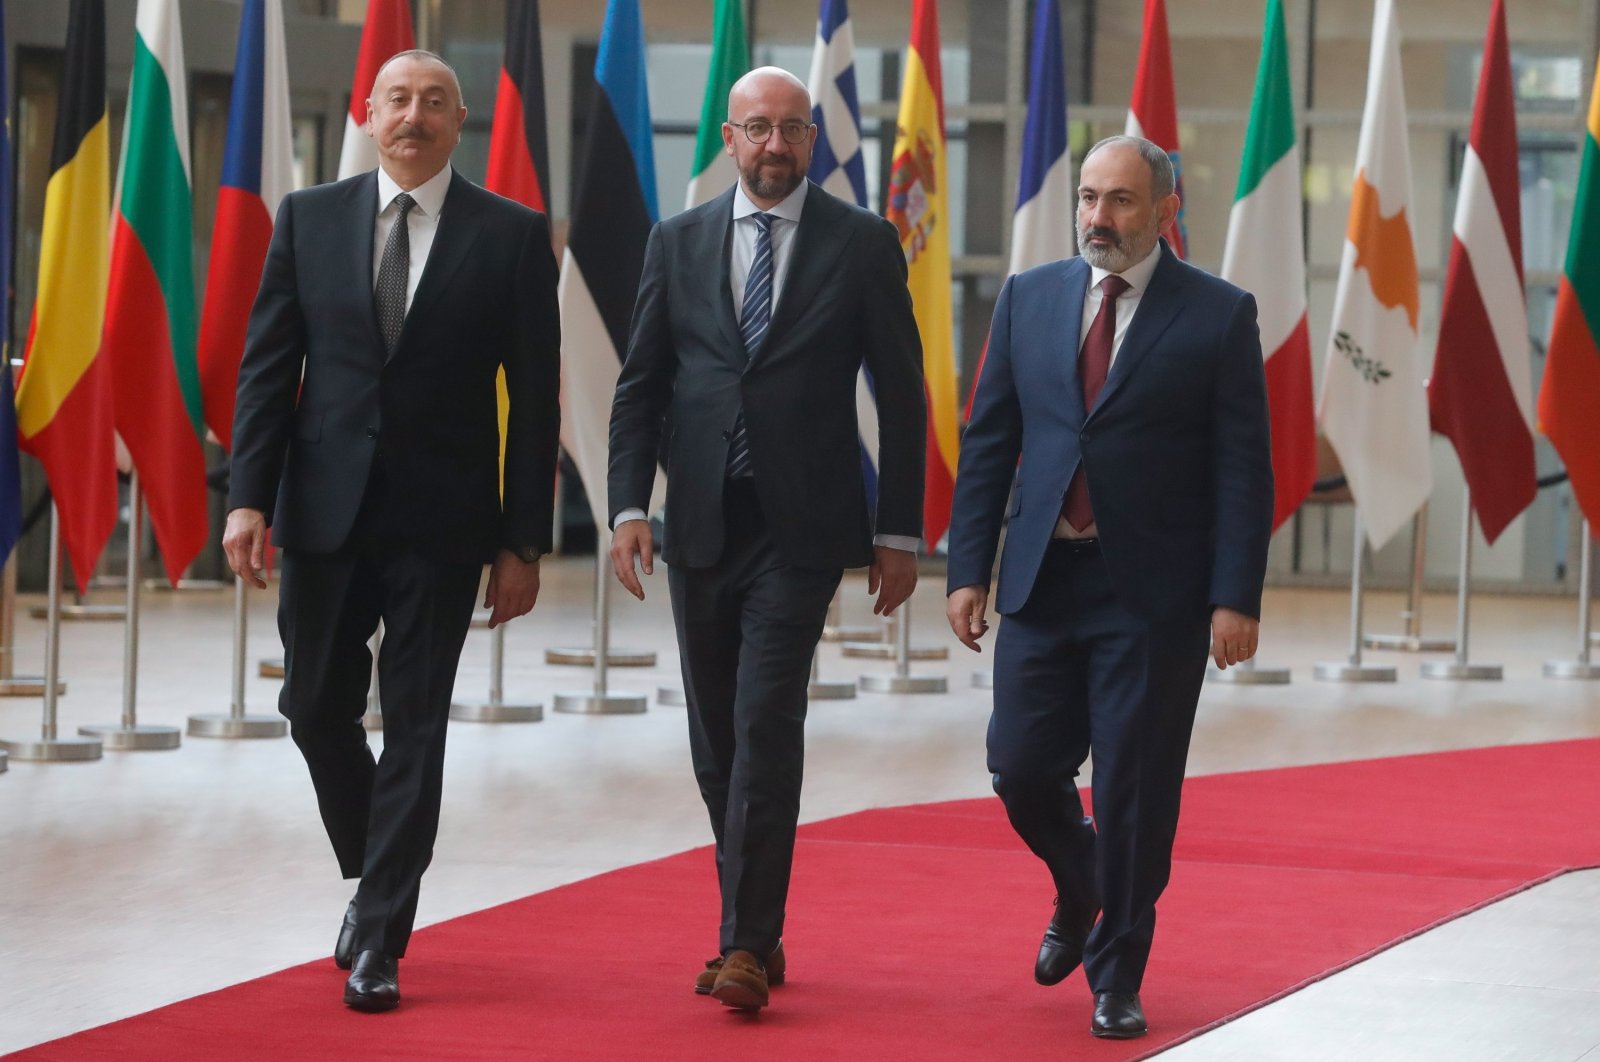 Azerbaijani President Ilham Aliyev (L) and Armenian Prime Minister Nikol Pashinian are welcomed by European Council President Charles Michel (C) in Brussels, Belgium, May 22, 2022. (EPA Photo)